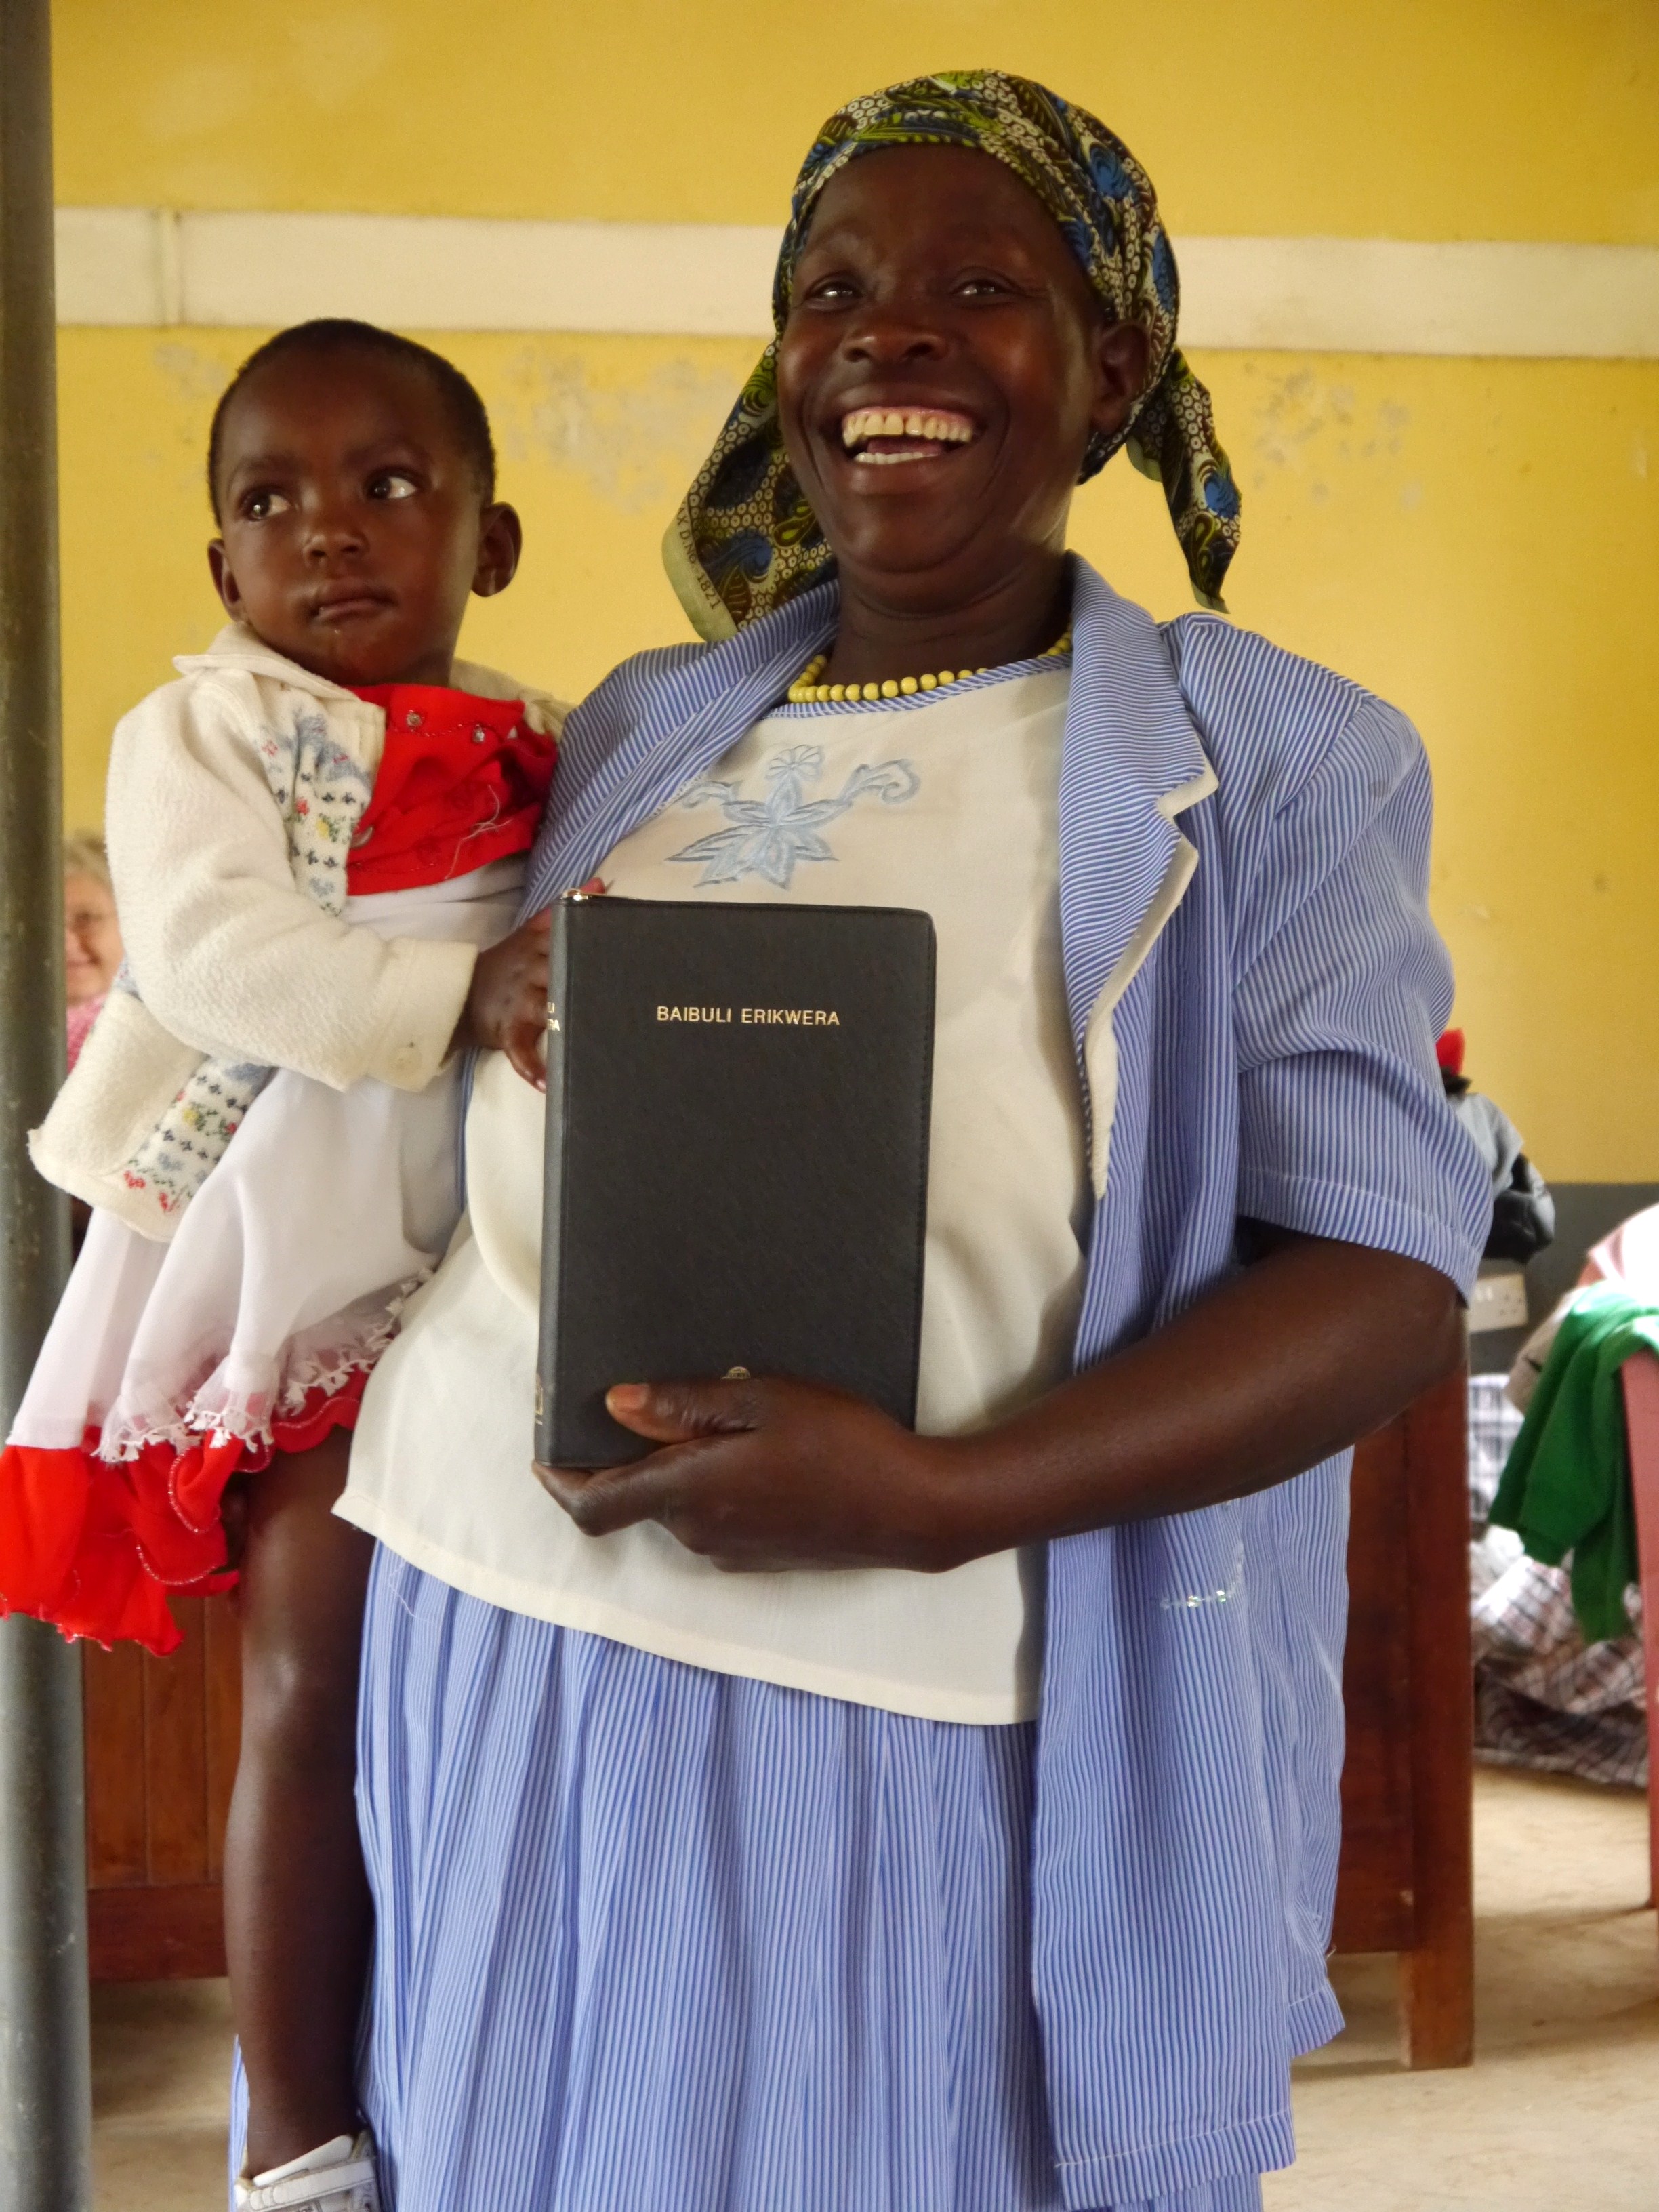 Happy to receive a Bible